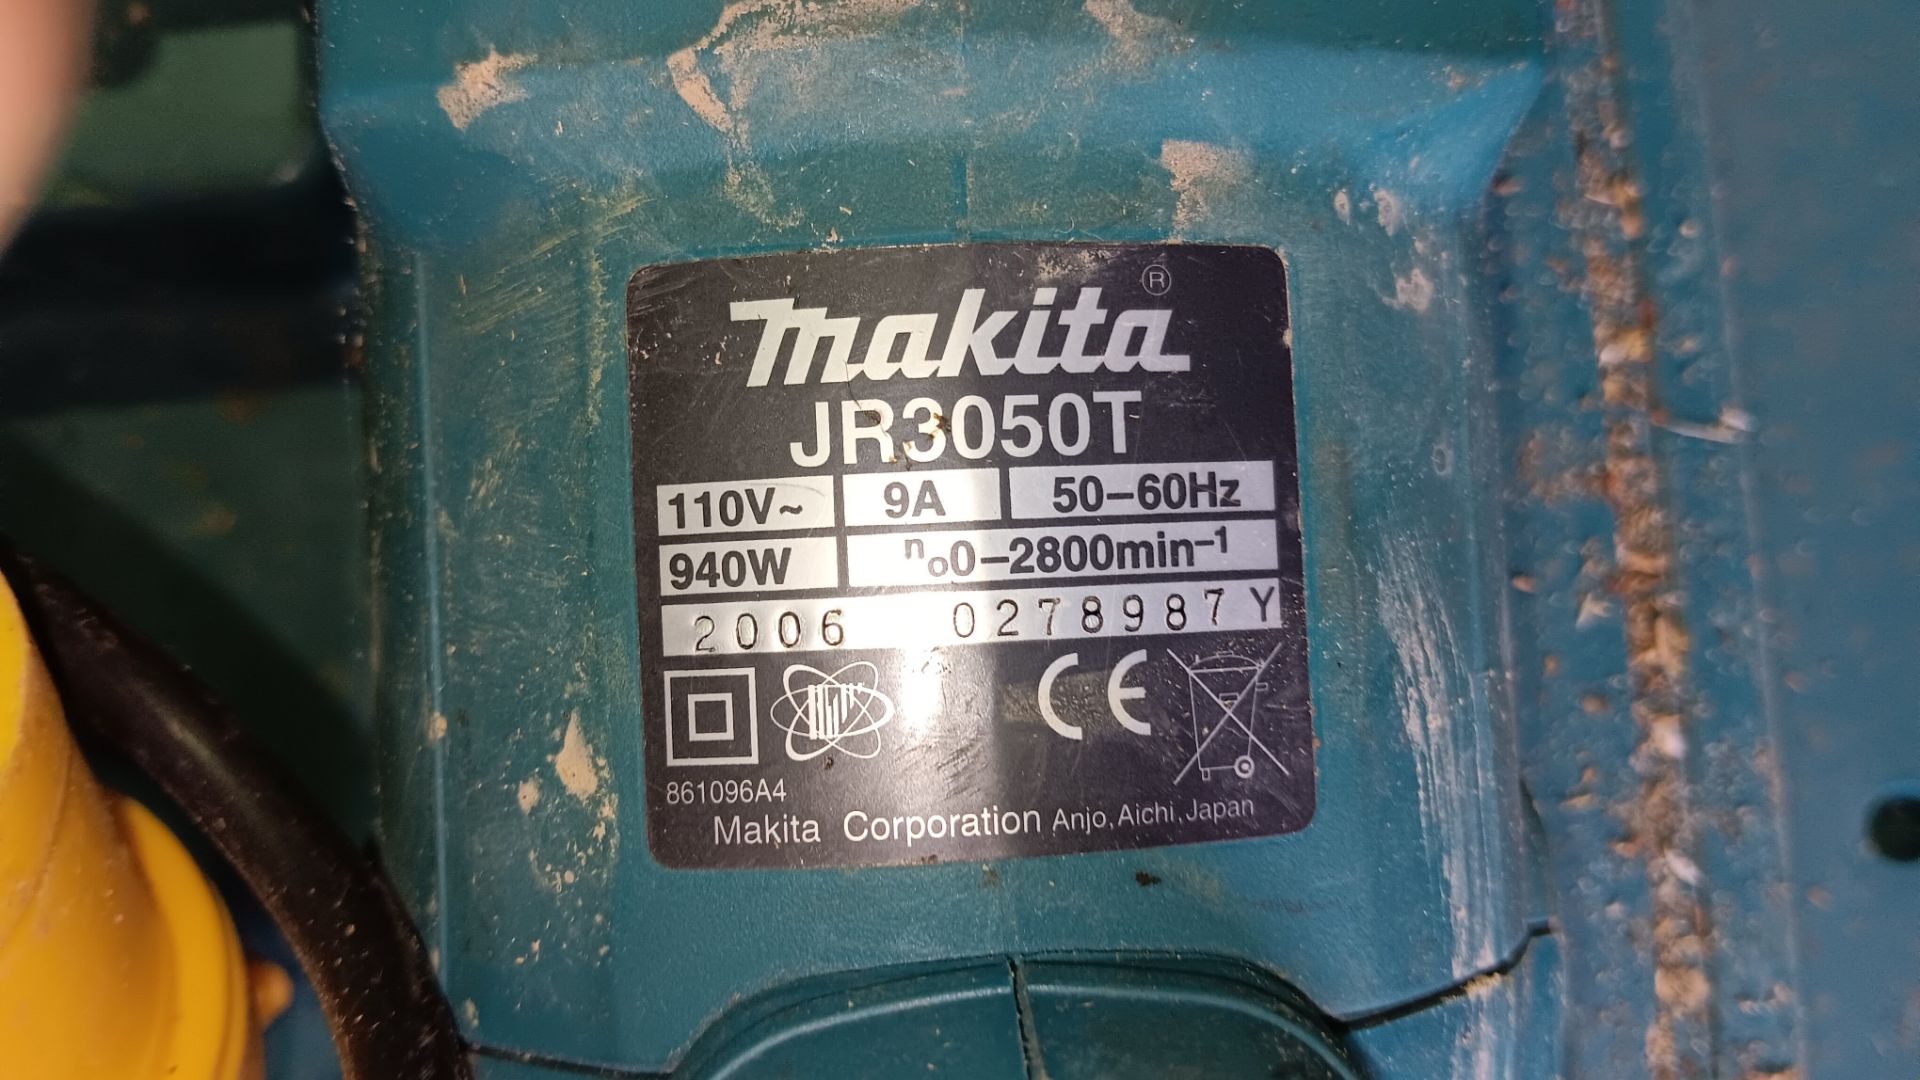 Makita JR3050T reciprocating saw with case ,110v, serial number 0278987Y (2006) - Image 2 of 2